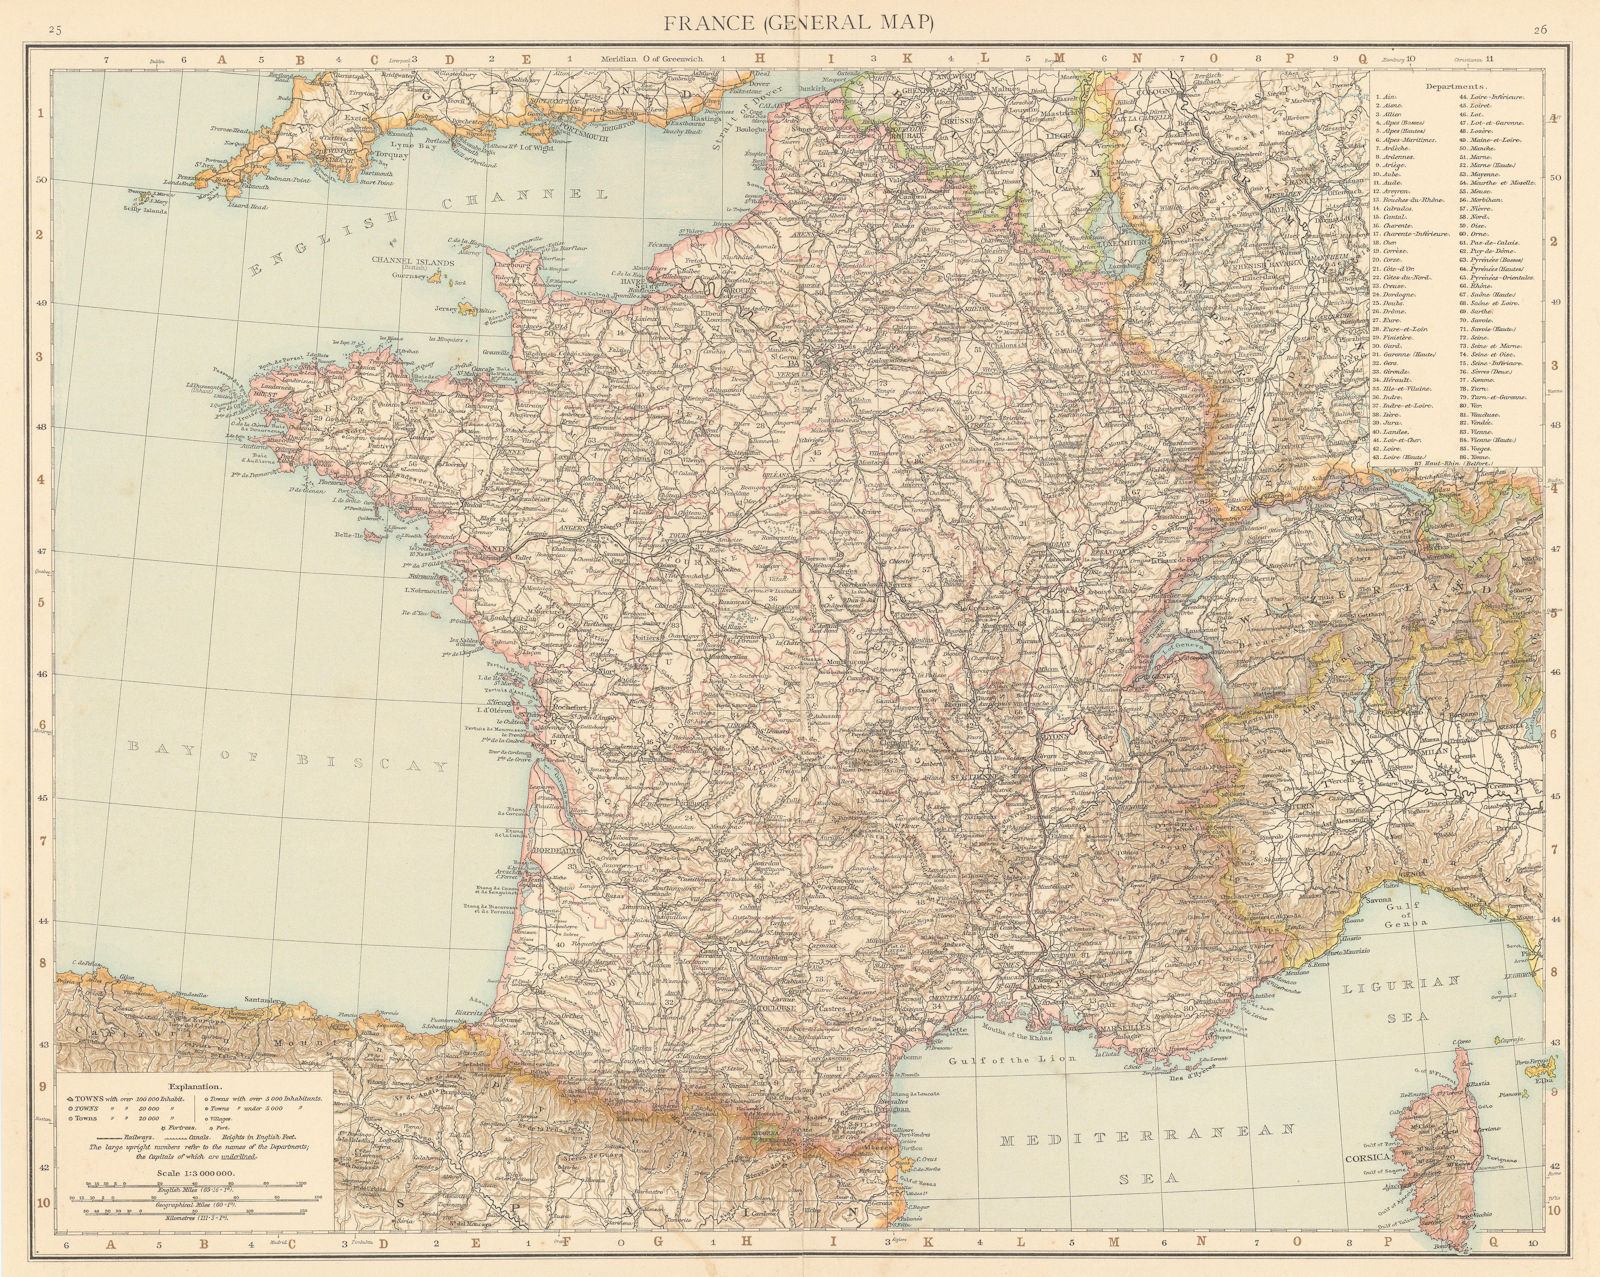 France (General map) without Alsace & Lorraine. THE TIMES 1895 old antique